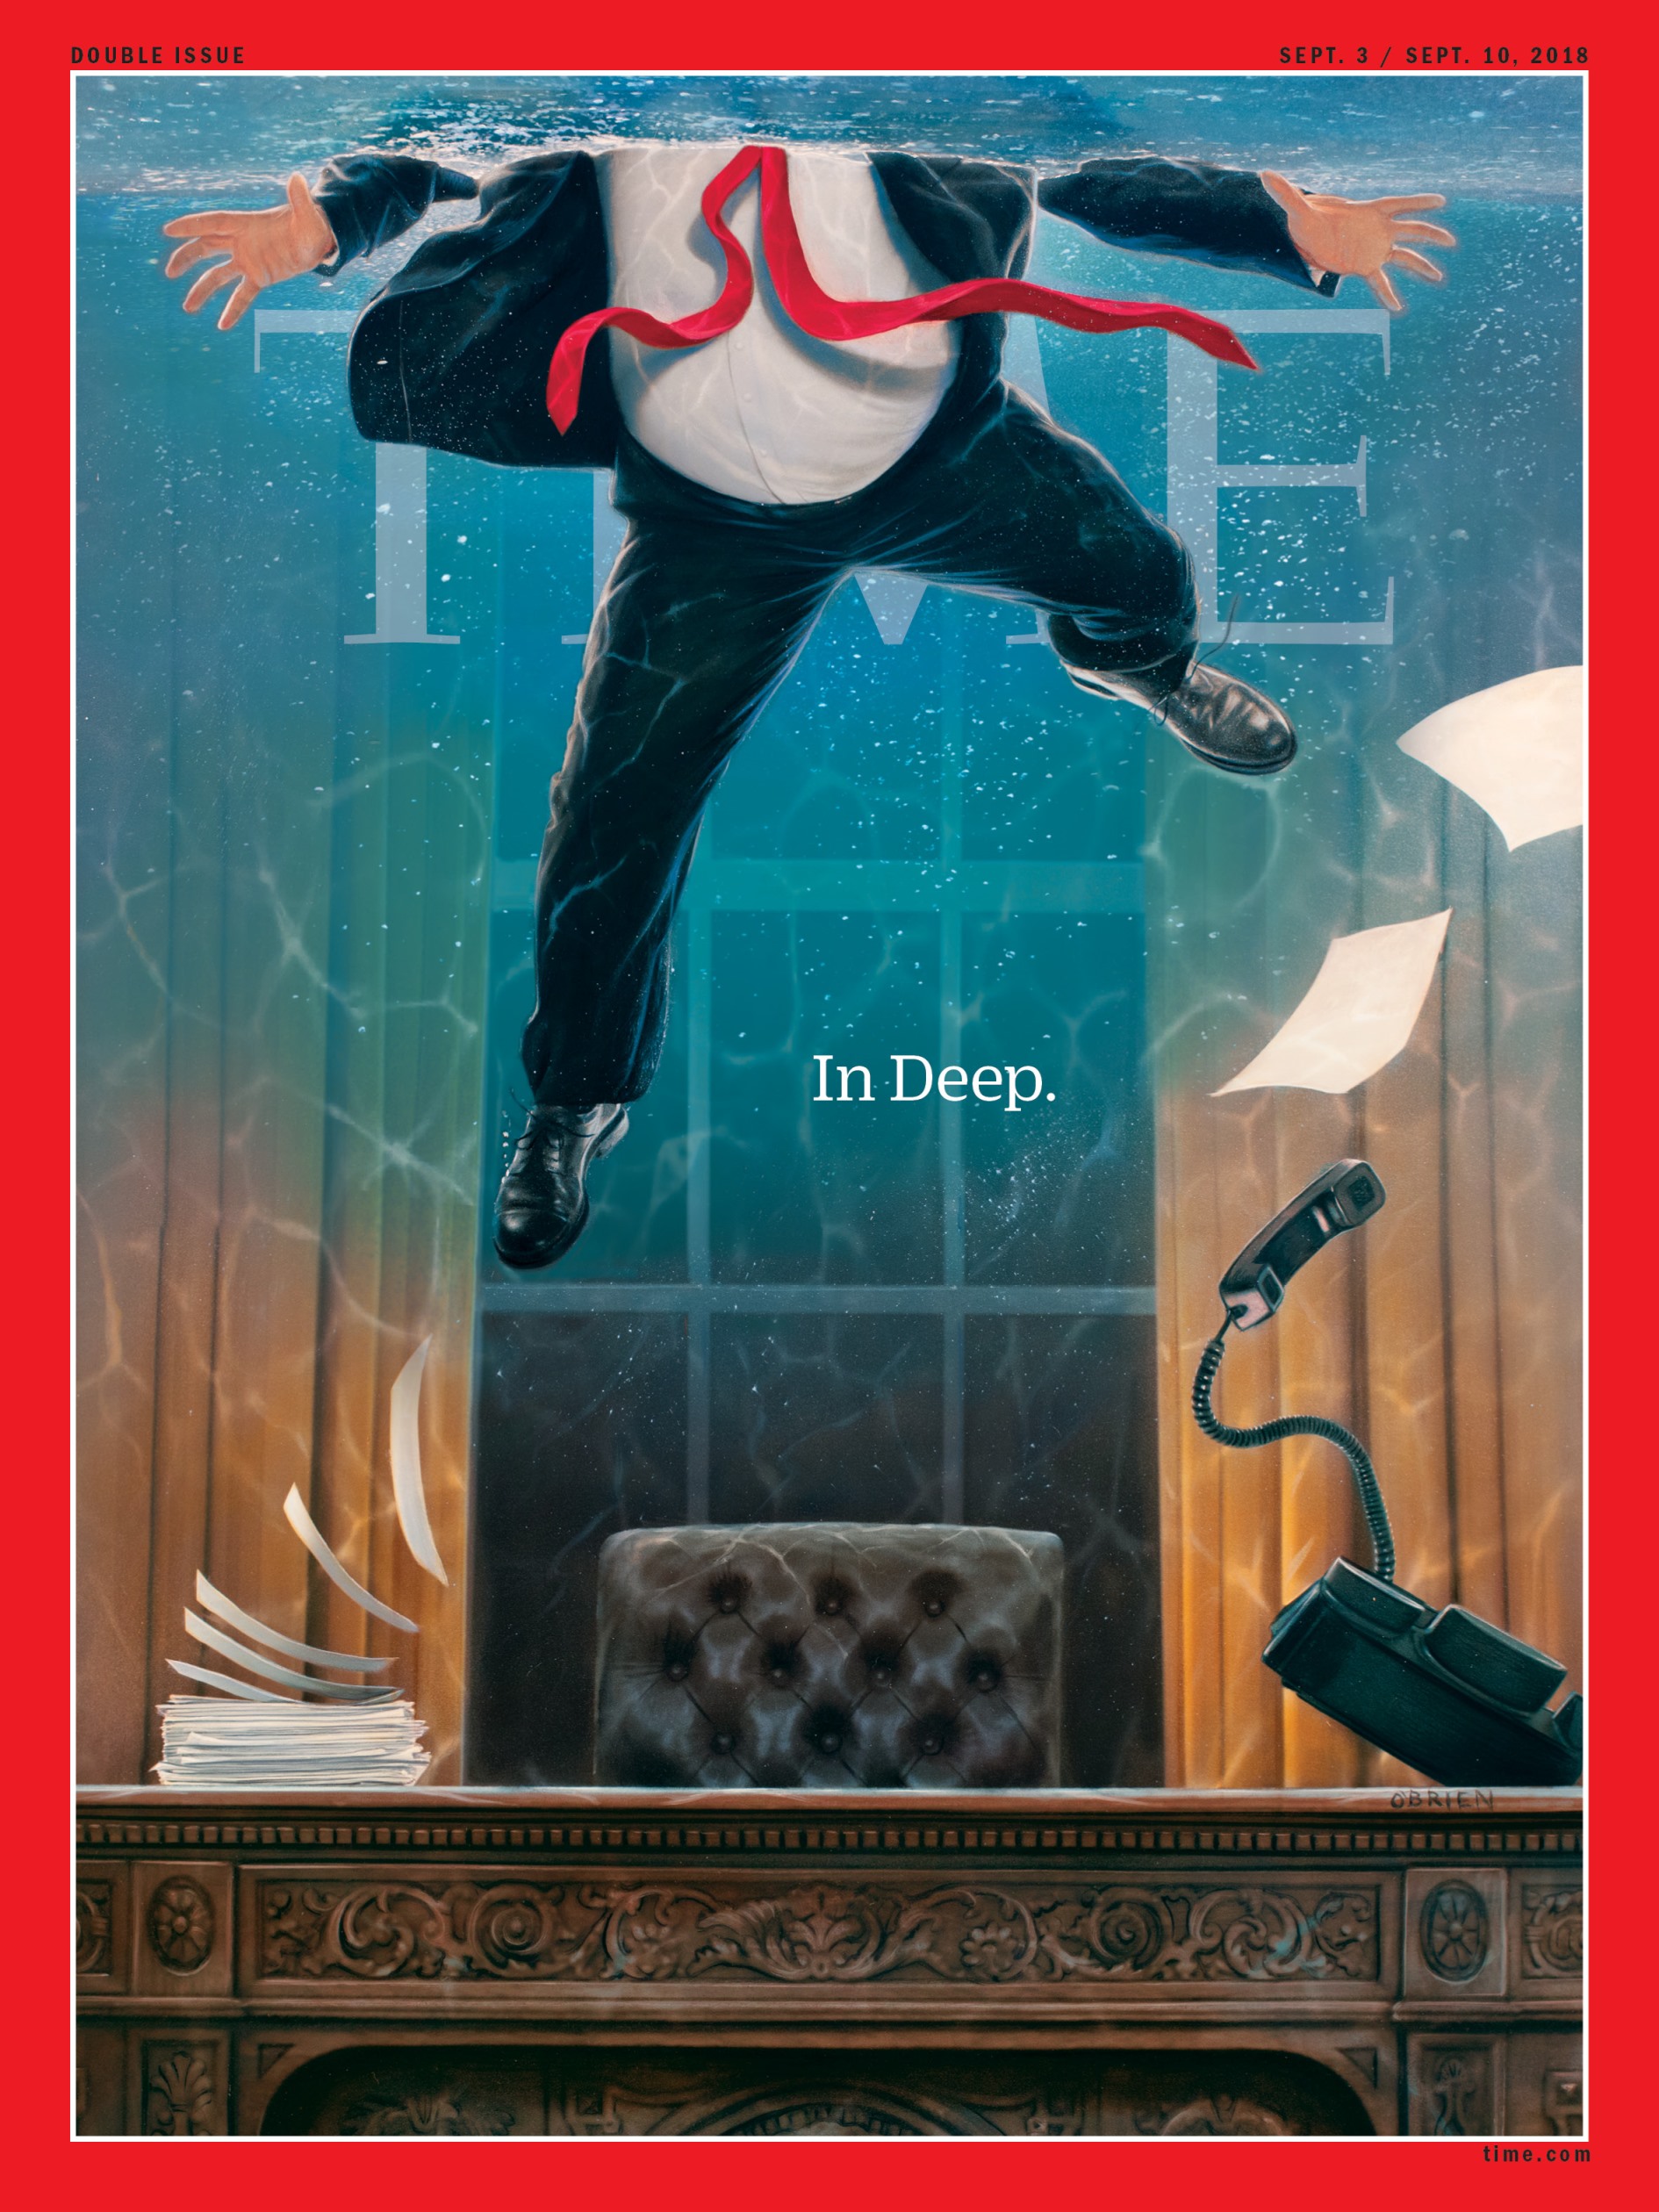 He drowned: Time magazine brutally trampled Trump a series of covers 94ec6ac845f9e2eec2d10b78077cb77d